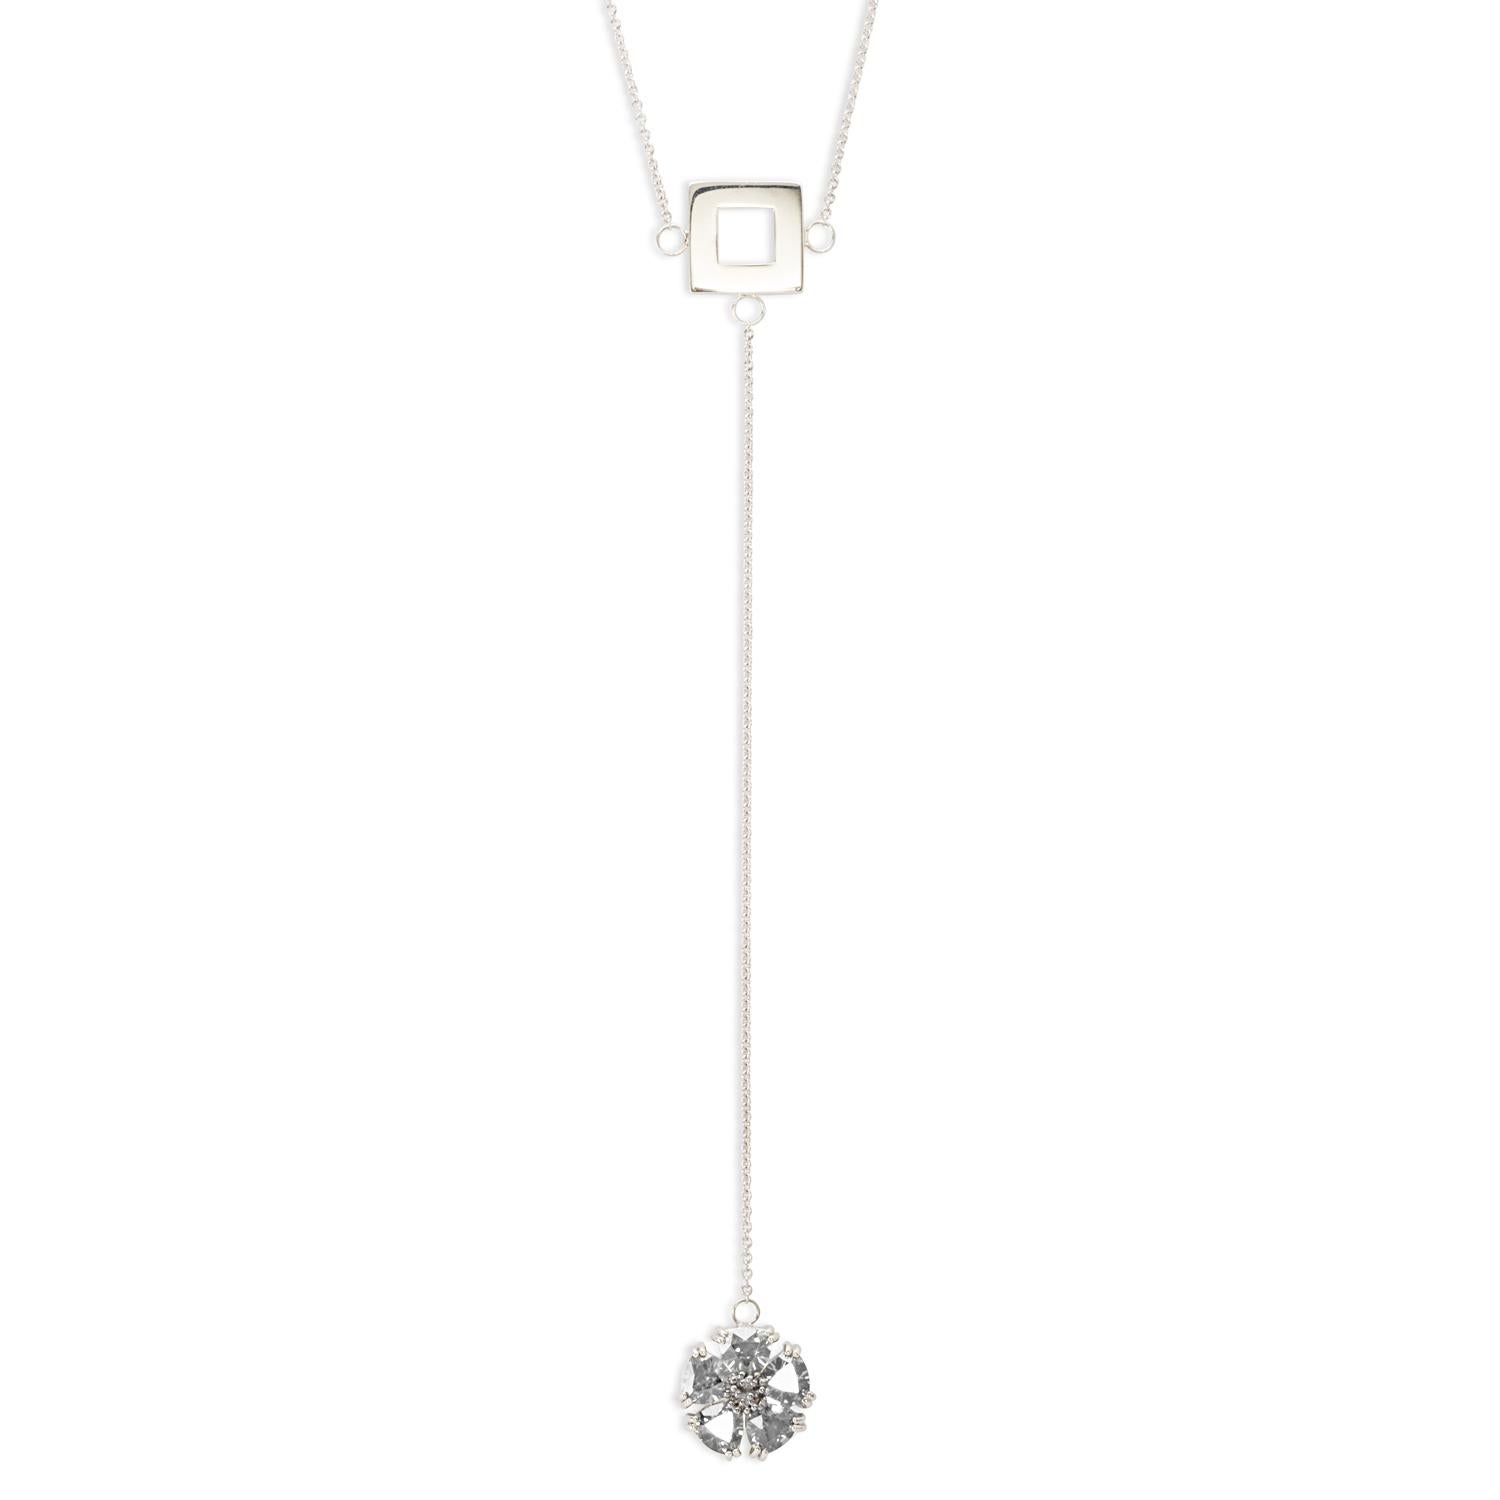 Designed in NYC

.925 Sterling Silver 5 x 7 mm Amethyst Blossom Stone and Square Lariat Necklace. No matter the season, allow natural beauty to surround you wherever you go. Blossom stone and square lariat necklace: 

Sterling silver 
High-polish